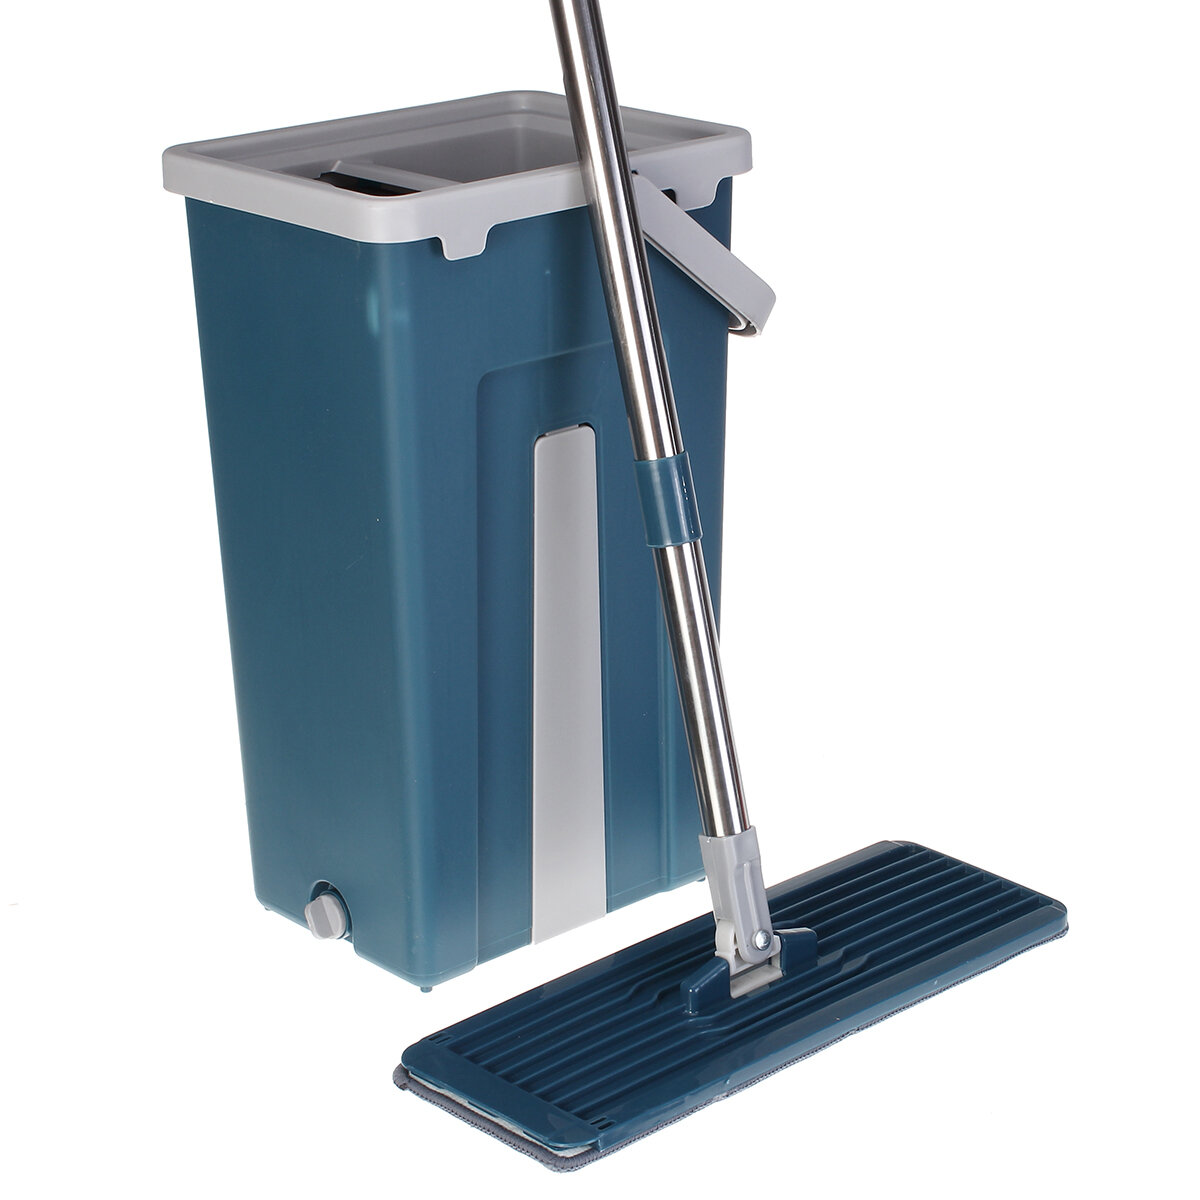 

Flat Squeeze Mop Hand Free Wringing Stainless Steel Mop Self Wet Dry Cleaning Mop with 2 Microfiber Pad Blue Bucket Set